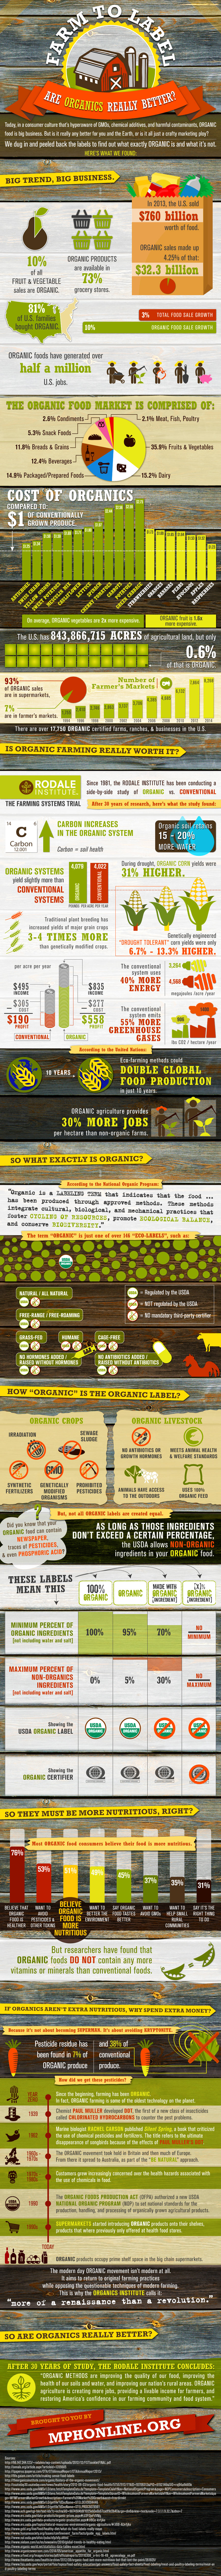 photo of Why You Should Buy Organic Food for You and Your Family image